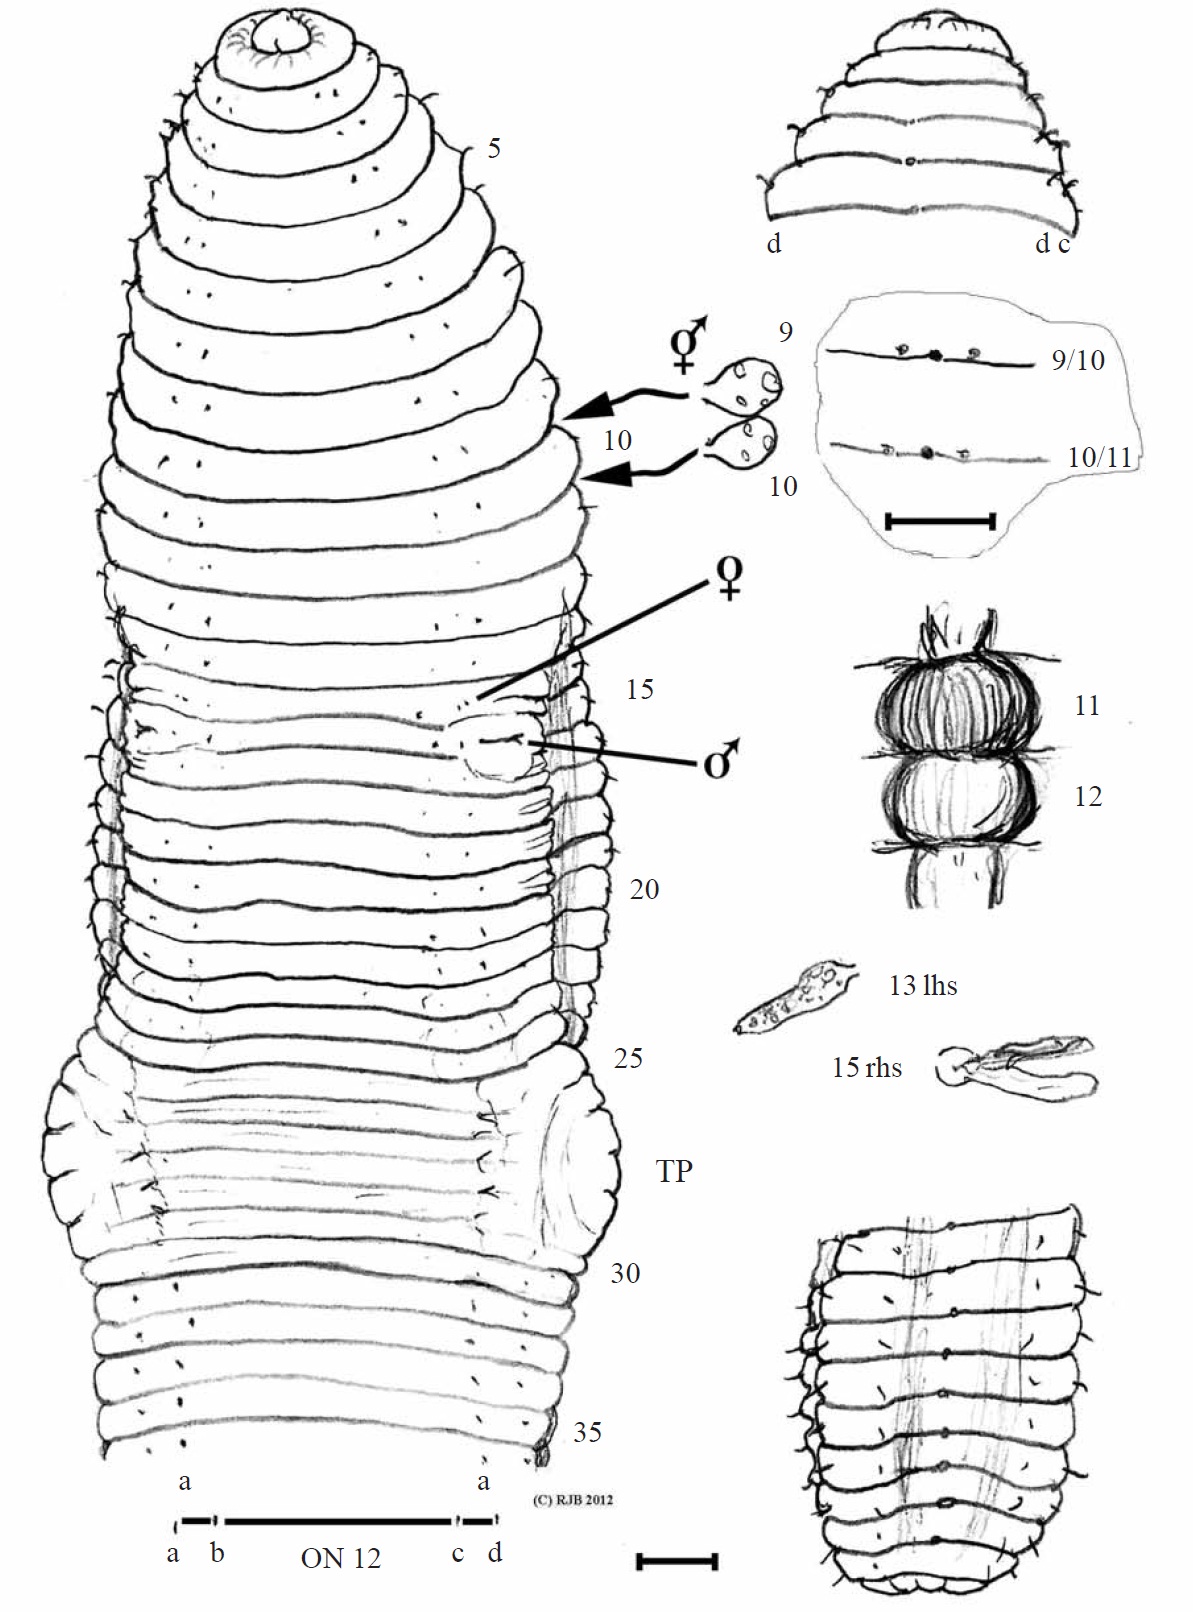 Eisenia gaga: holotype (contracted specimen #1 IV000245509) ventral view of anterior, prostomium and dorsal pores, enlargement of spermathecal and dorsal pores; spermathecae in situ, sketch of calciferous glands in 11 and 12 ovaries in 13 lhs, nephridium in 15 rhs; posterior and pygidium, and actual setal ratios on segment 12. rhs, right hand side; lhs, left hand side. Scale bars=1 mm.